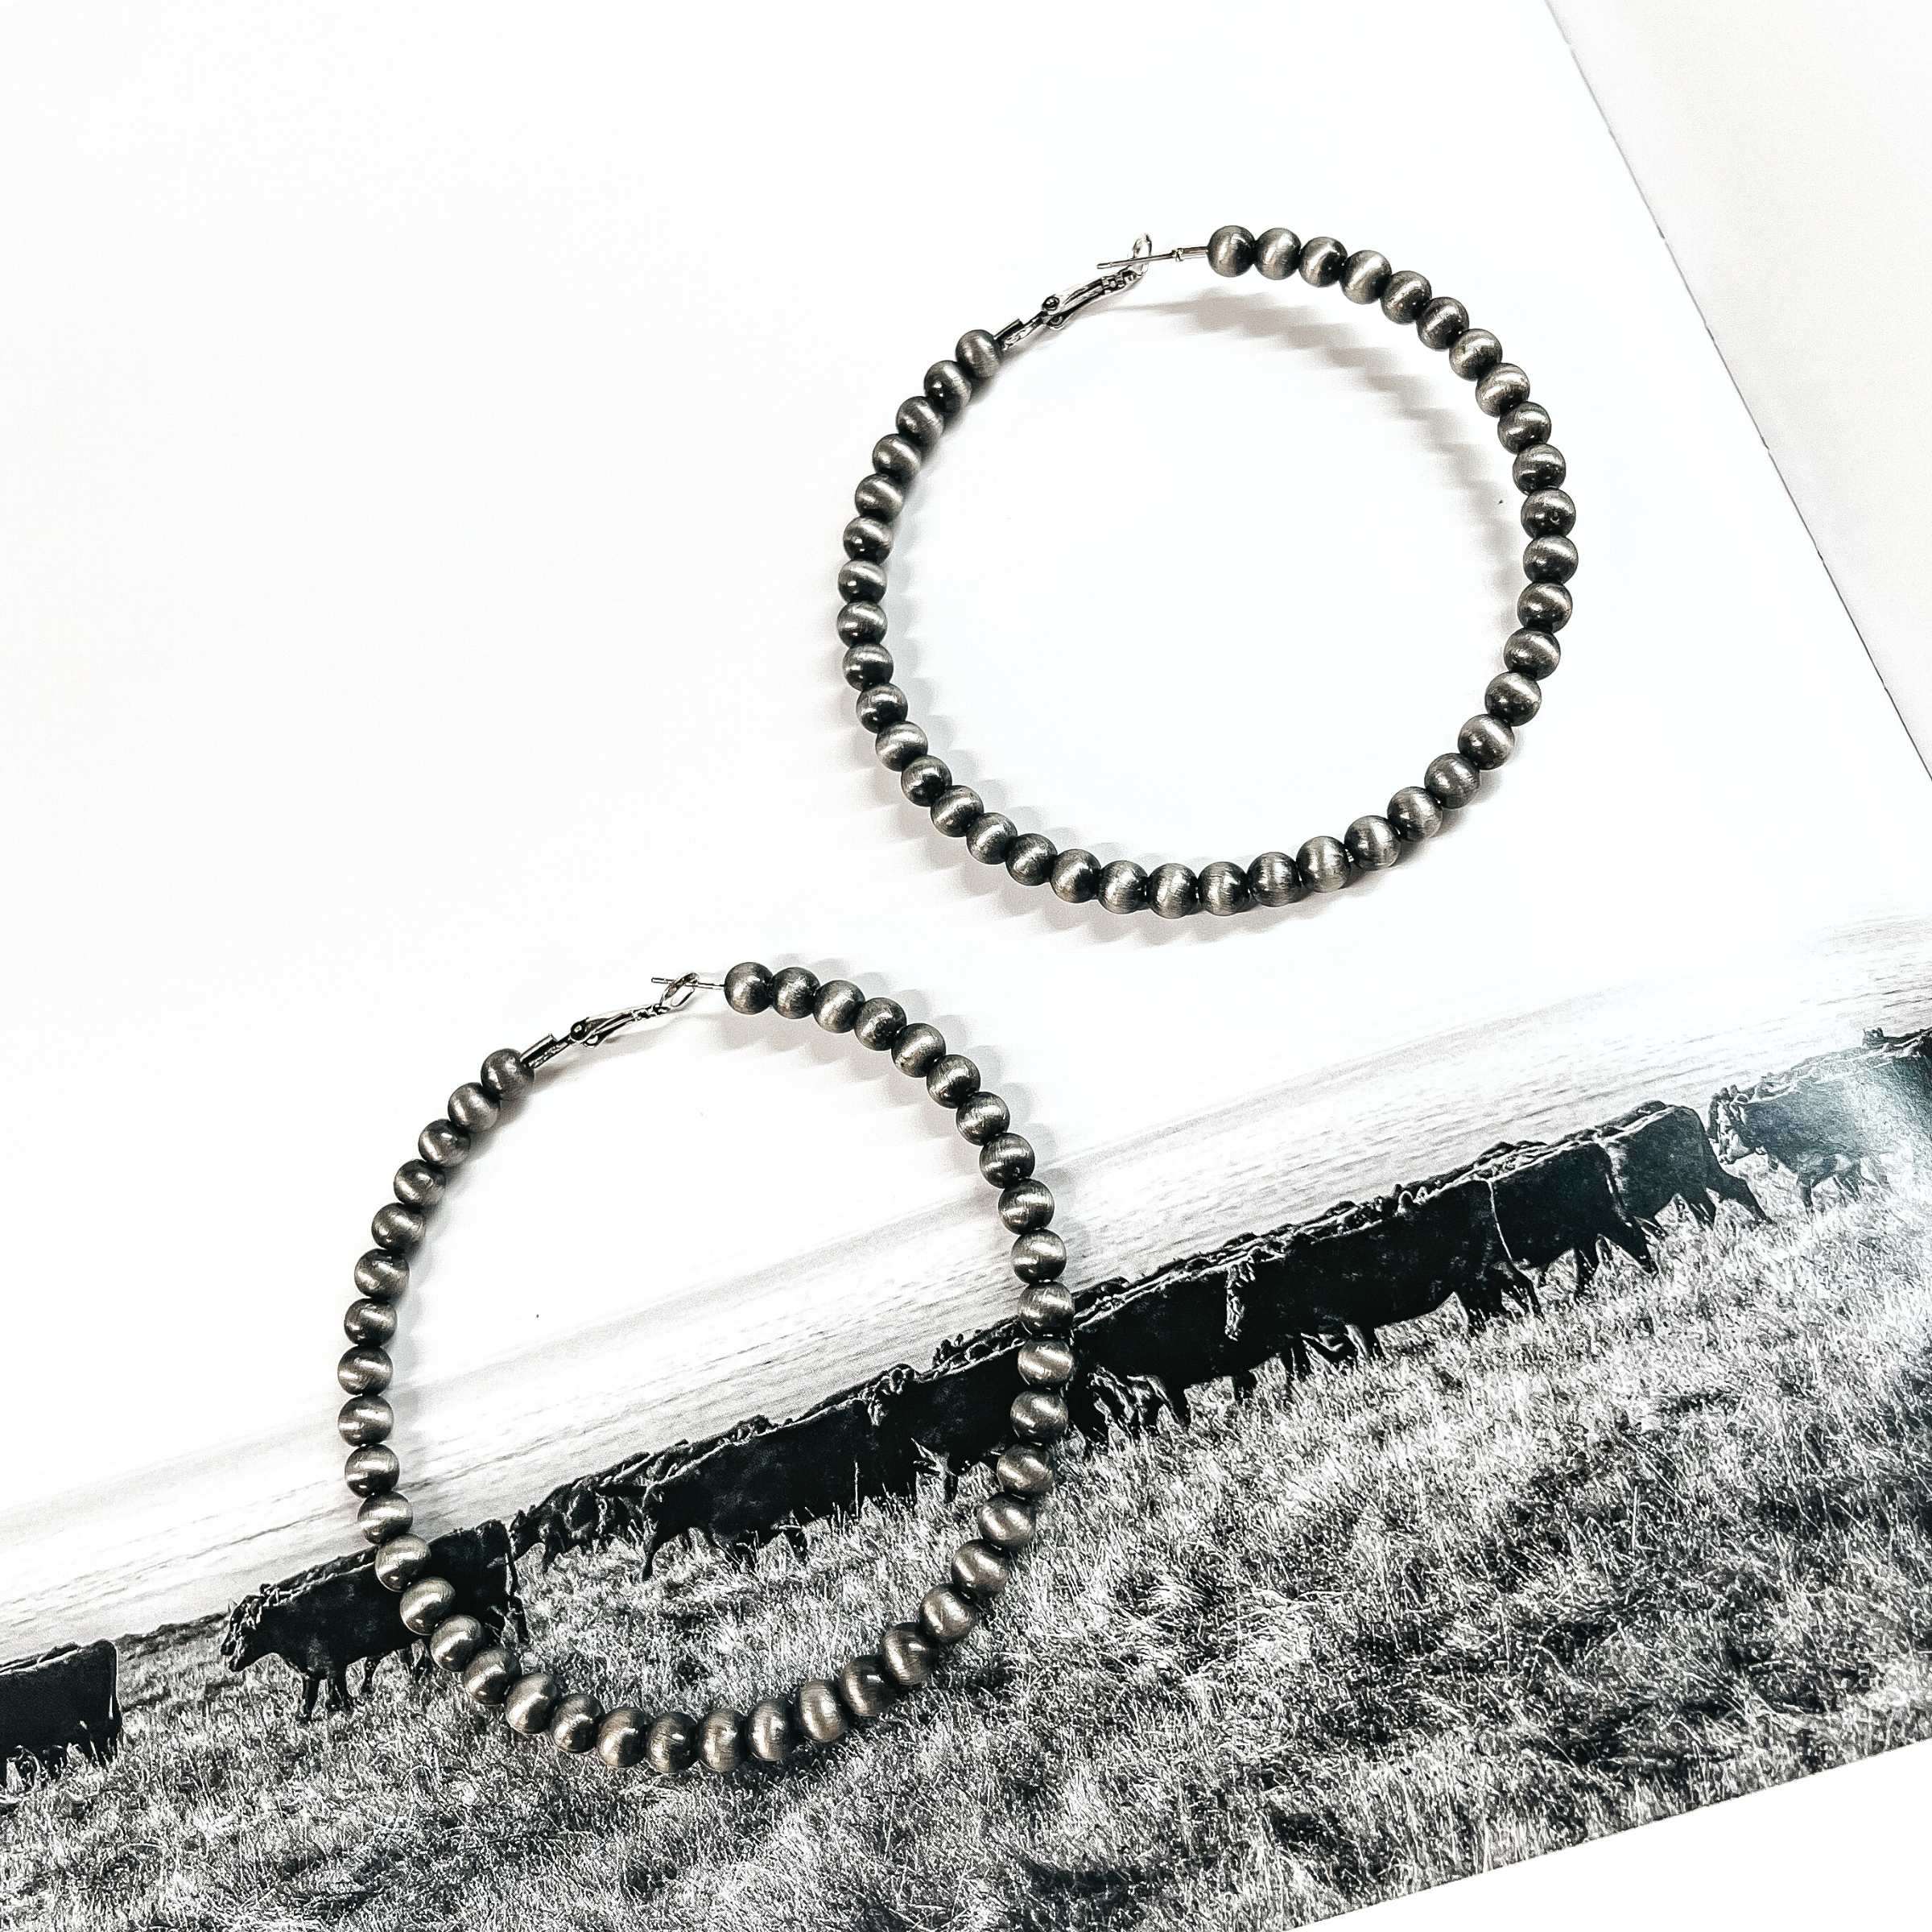 These are large silver beaded hoop earrings. These earrings are taken on a black and white outdoor page.